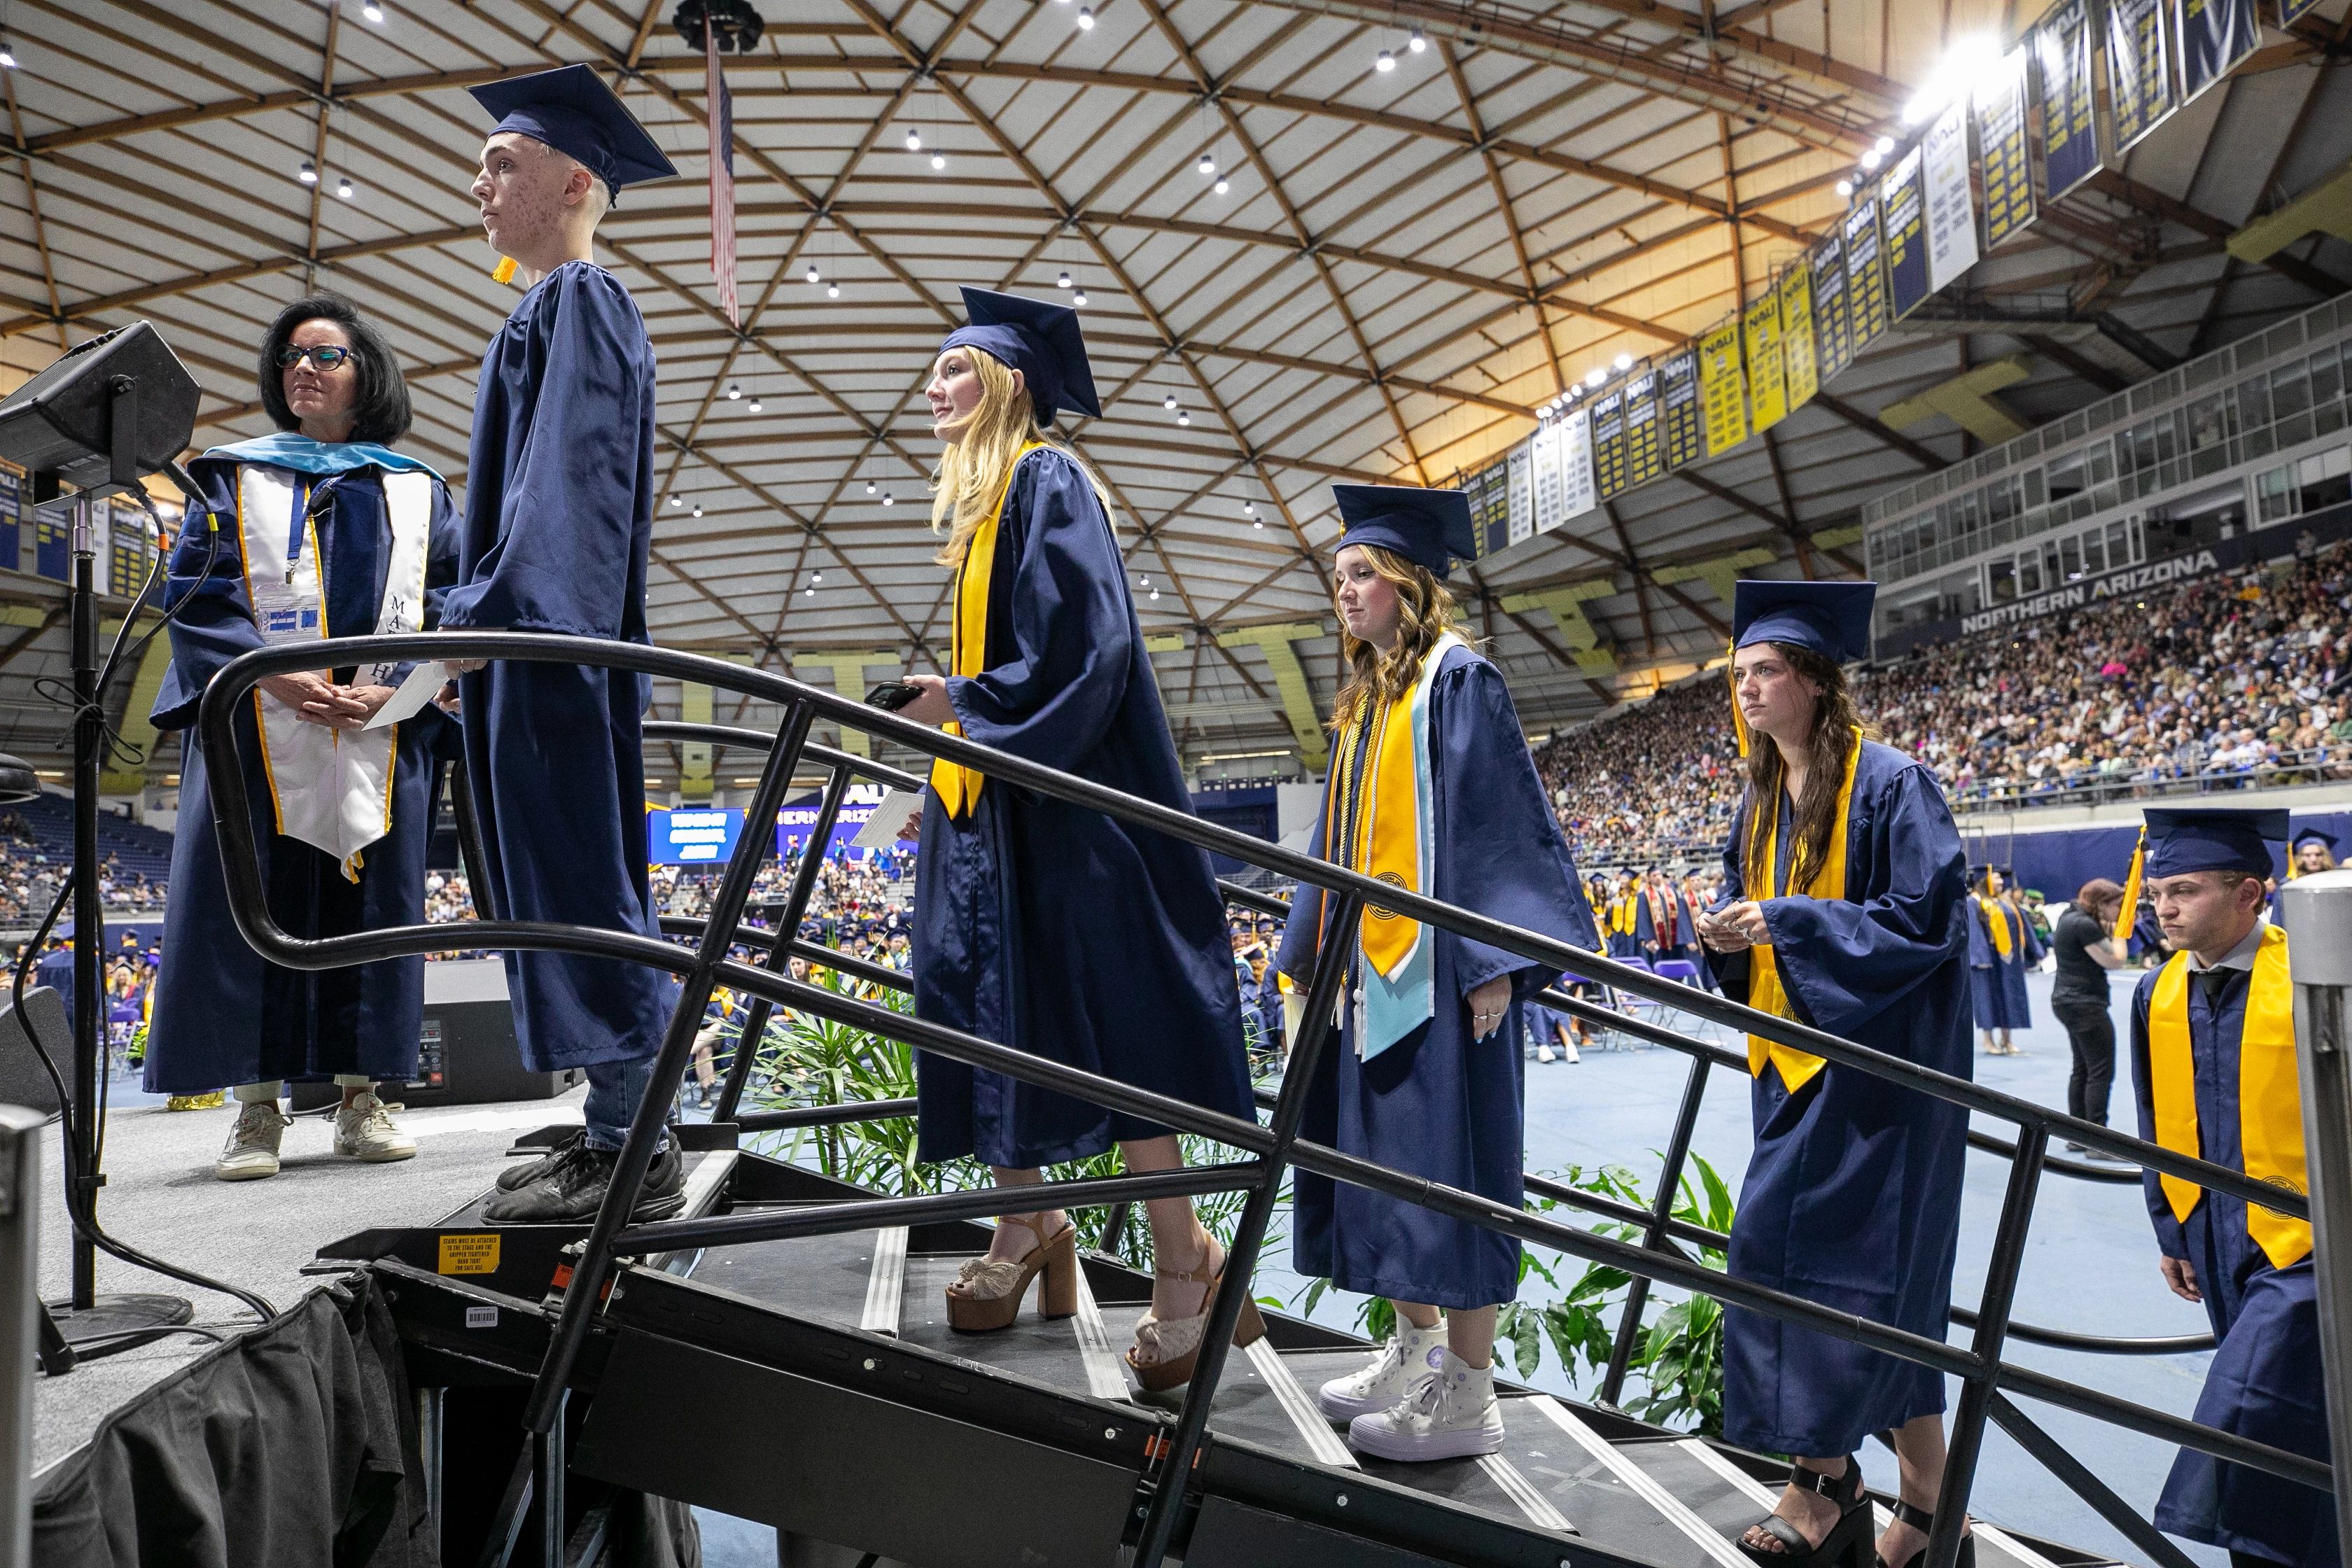 NAU students at commencement preparing to walk across the stage to receive their diplomas